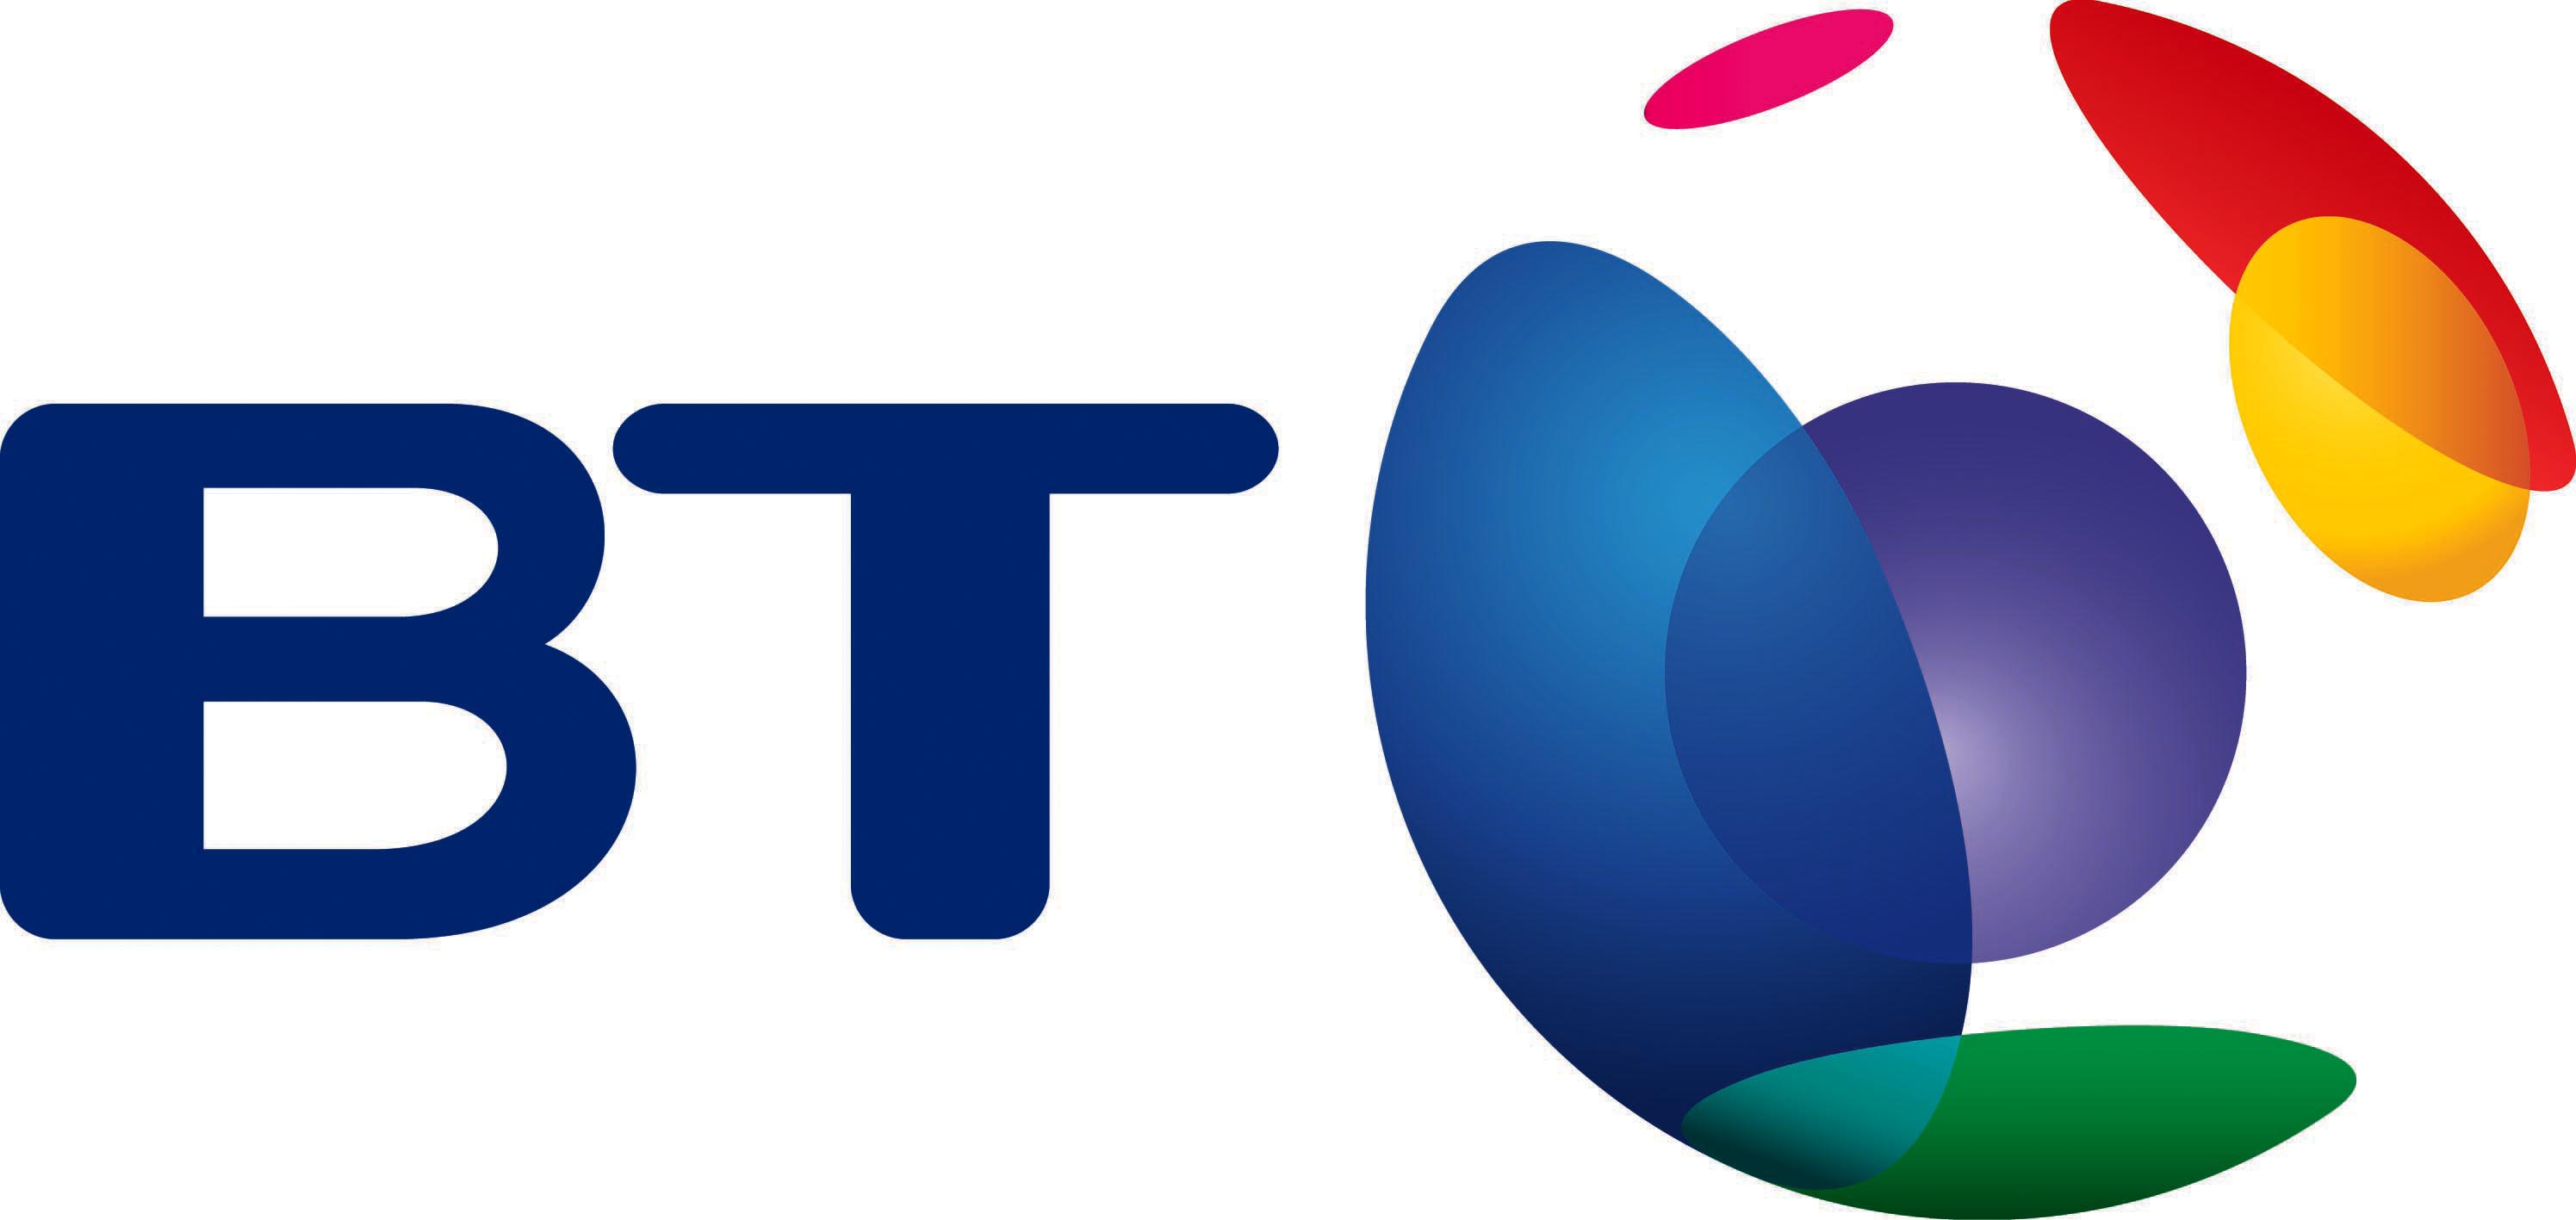 BT now offers an Android home phone that goes all the way to Google Play